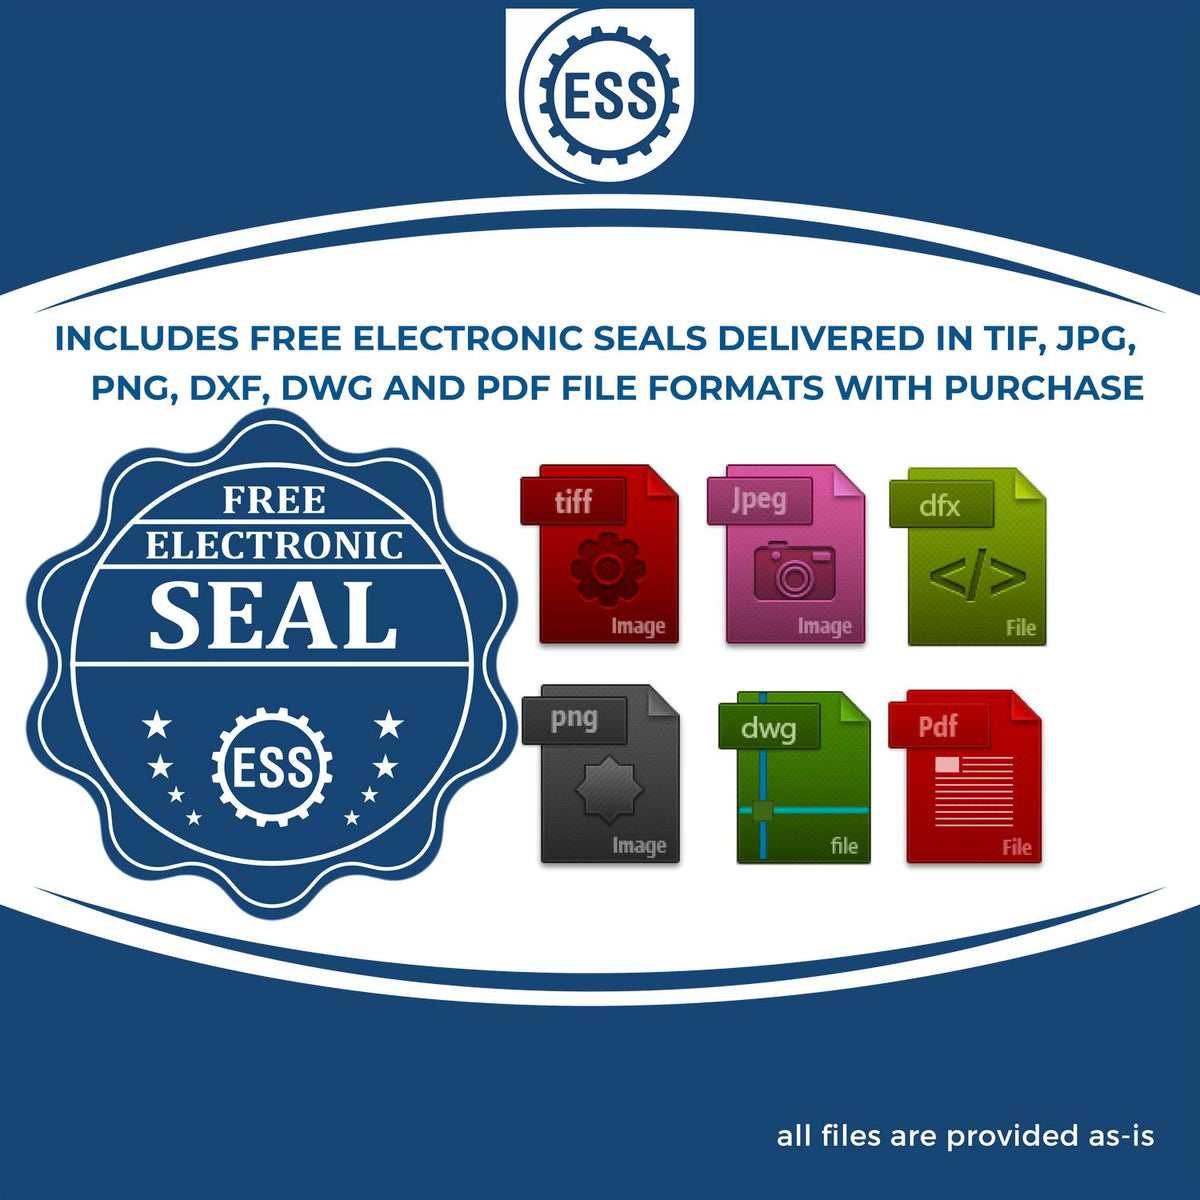 An infographic for the free electronic seal for the Wooden Handle Maryland Rectangular Notary Public Stamp illustrating the different file type icons such as DXF, DWG, TIF, JPG and PNG.